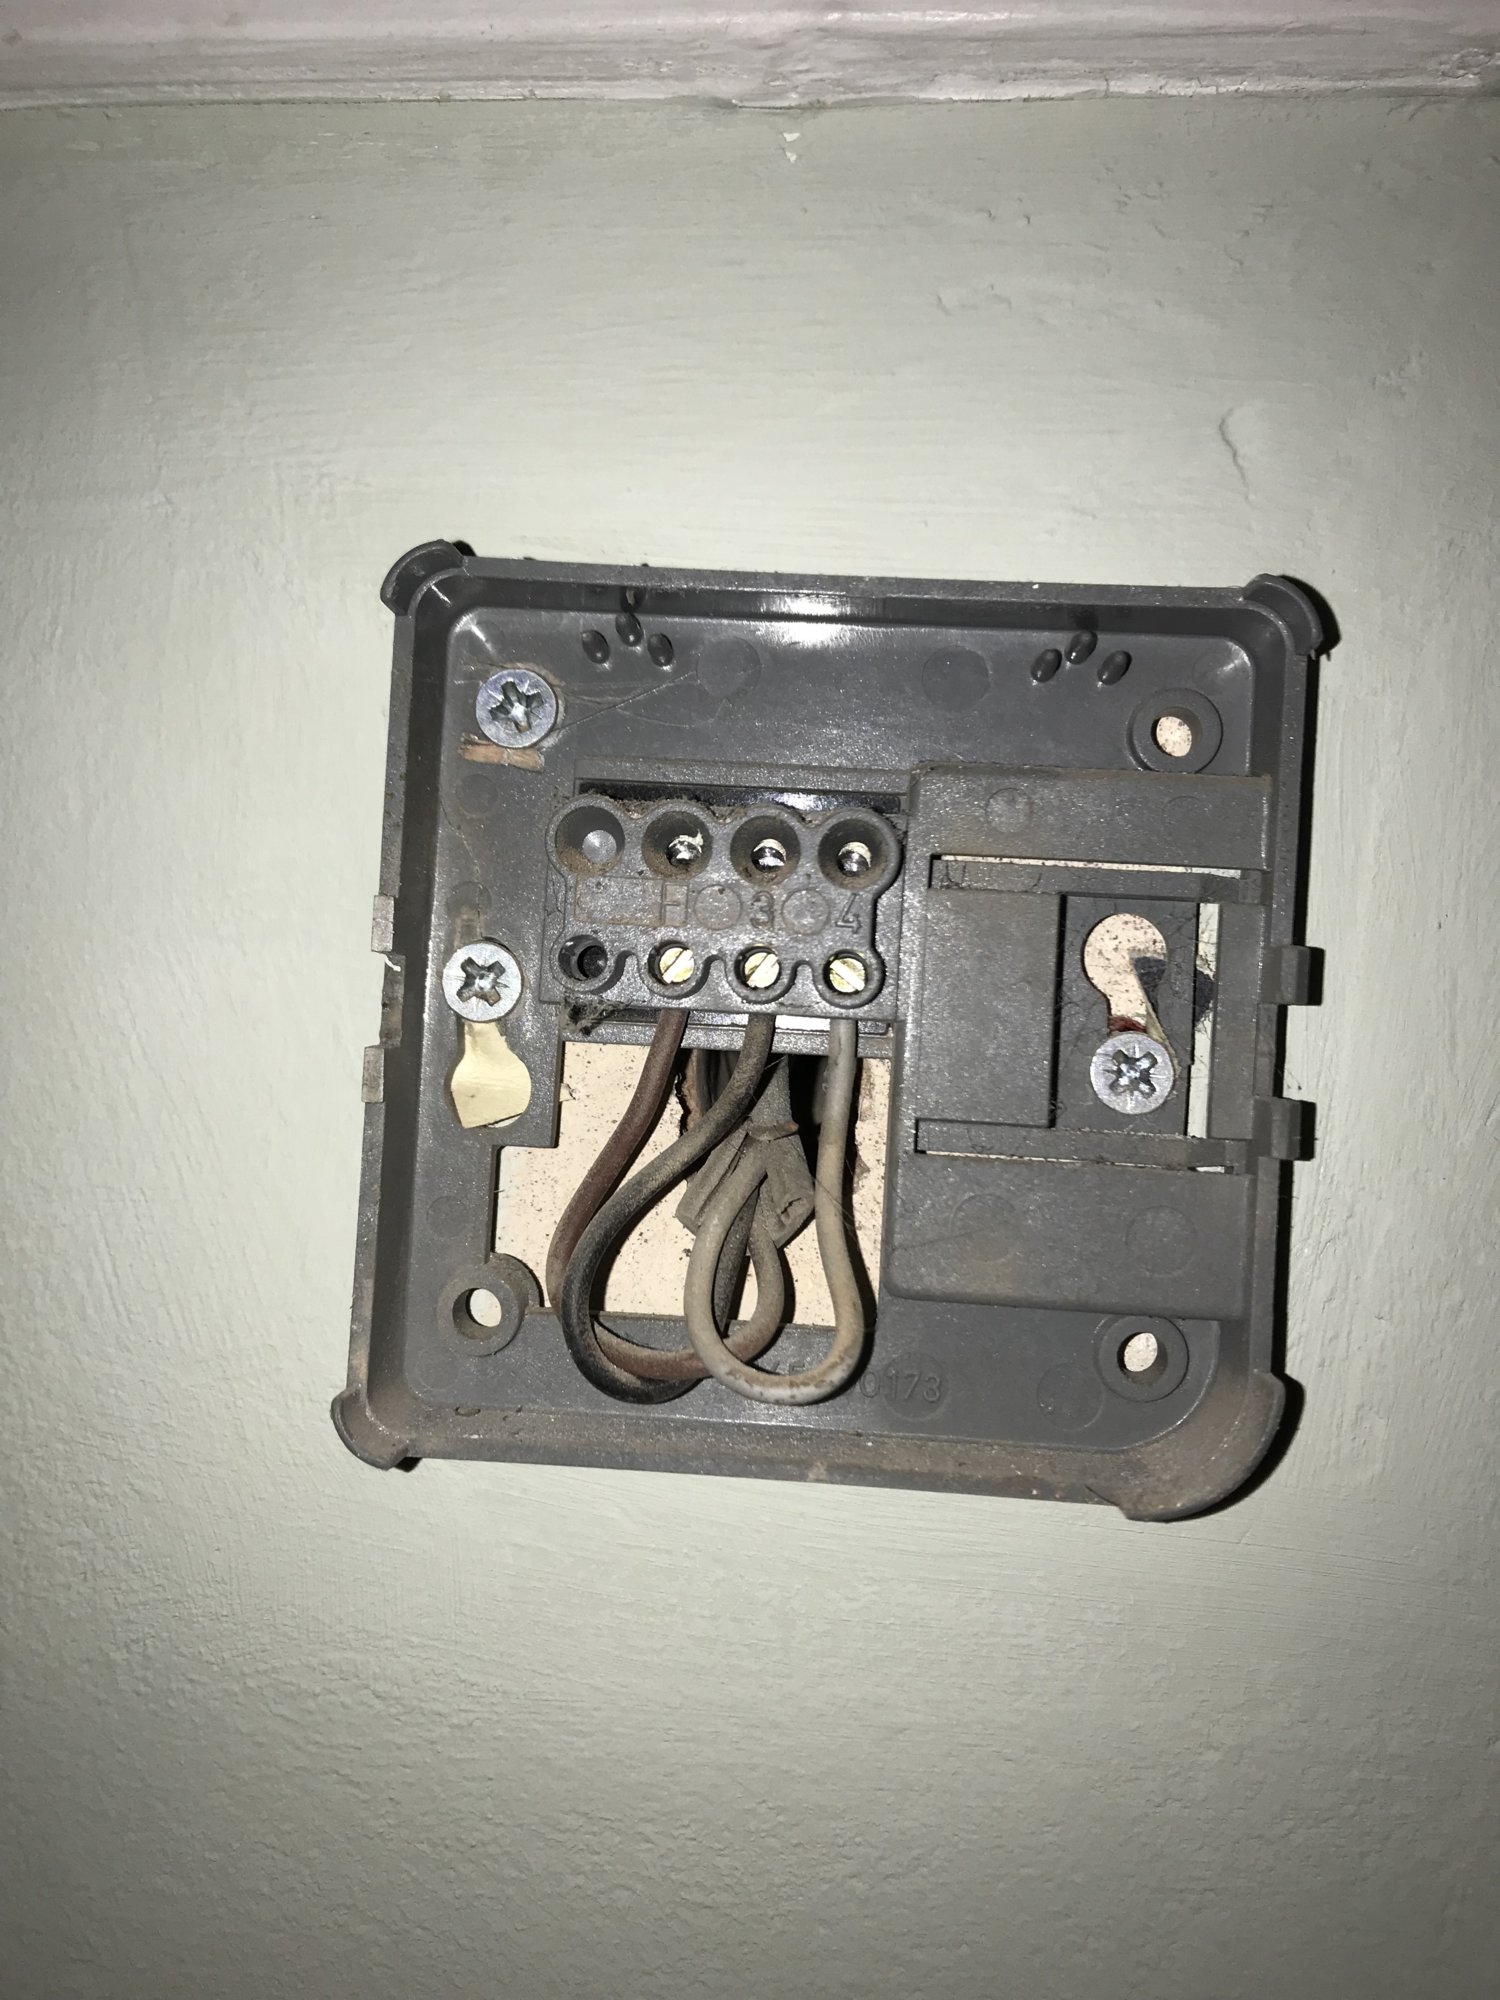 Current Thermostat Wiring